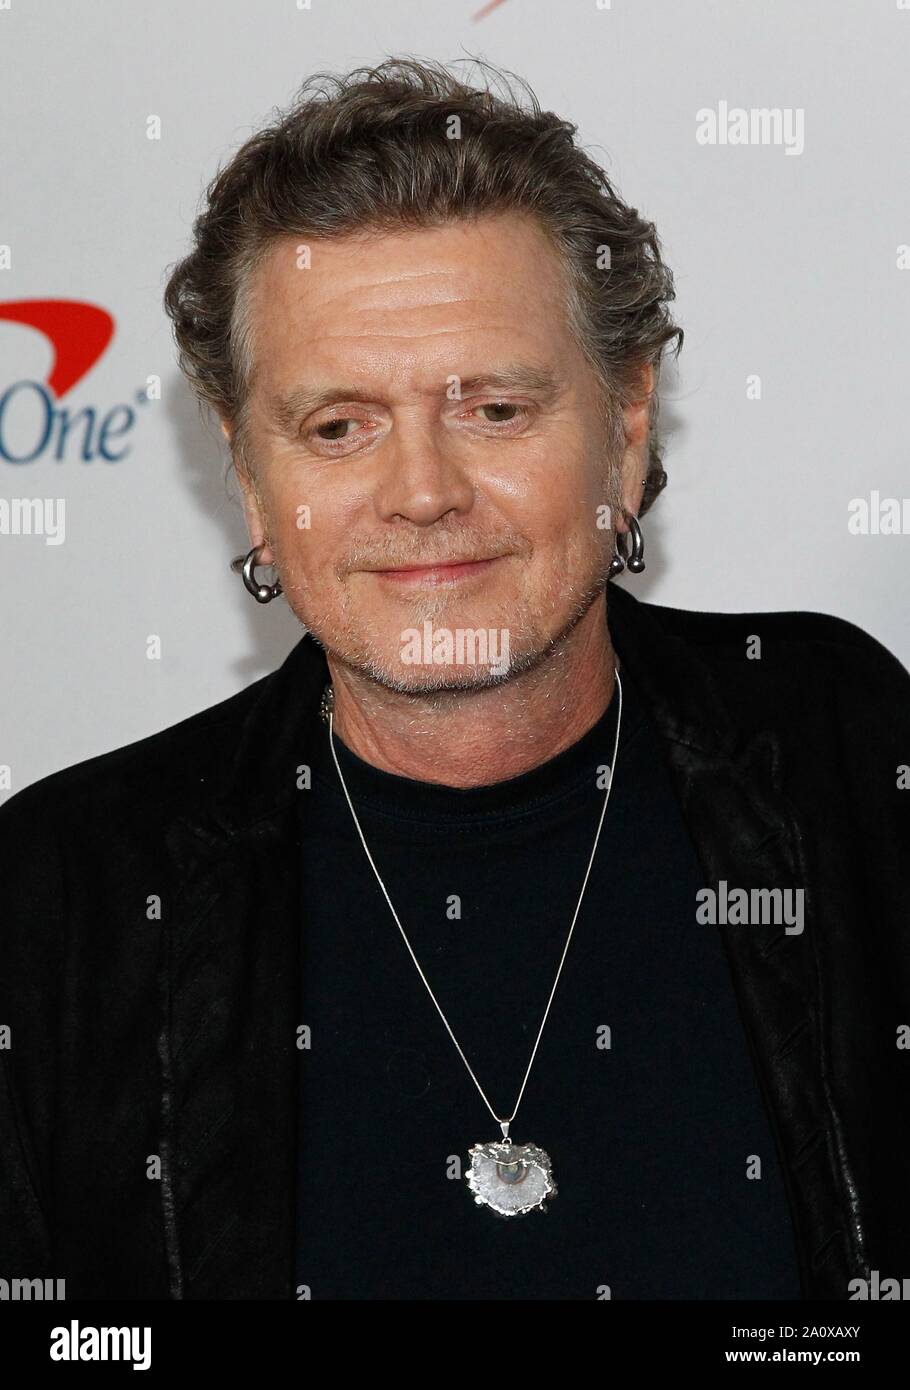 Rick Allen of Def Leppard at arrivals for 2019 iHeartRadio Music Festival - SAT, T-Mobile Arena, Las Vegas, NV September 21, 2019. Photo By: JA/Everett Collection Stock Photo